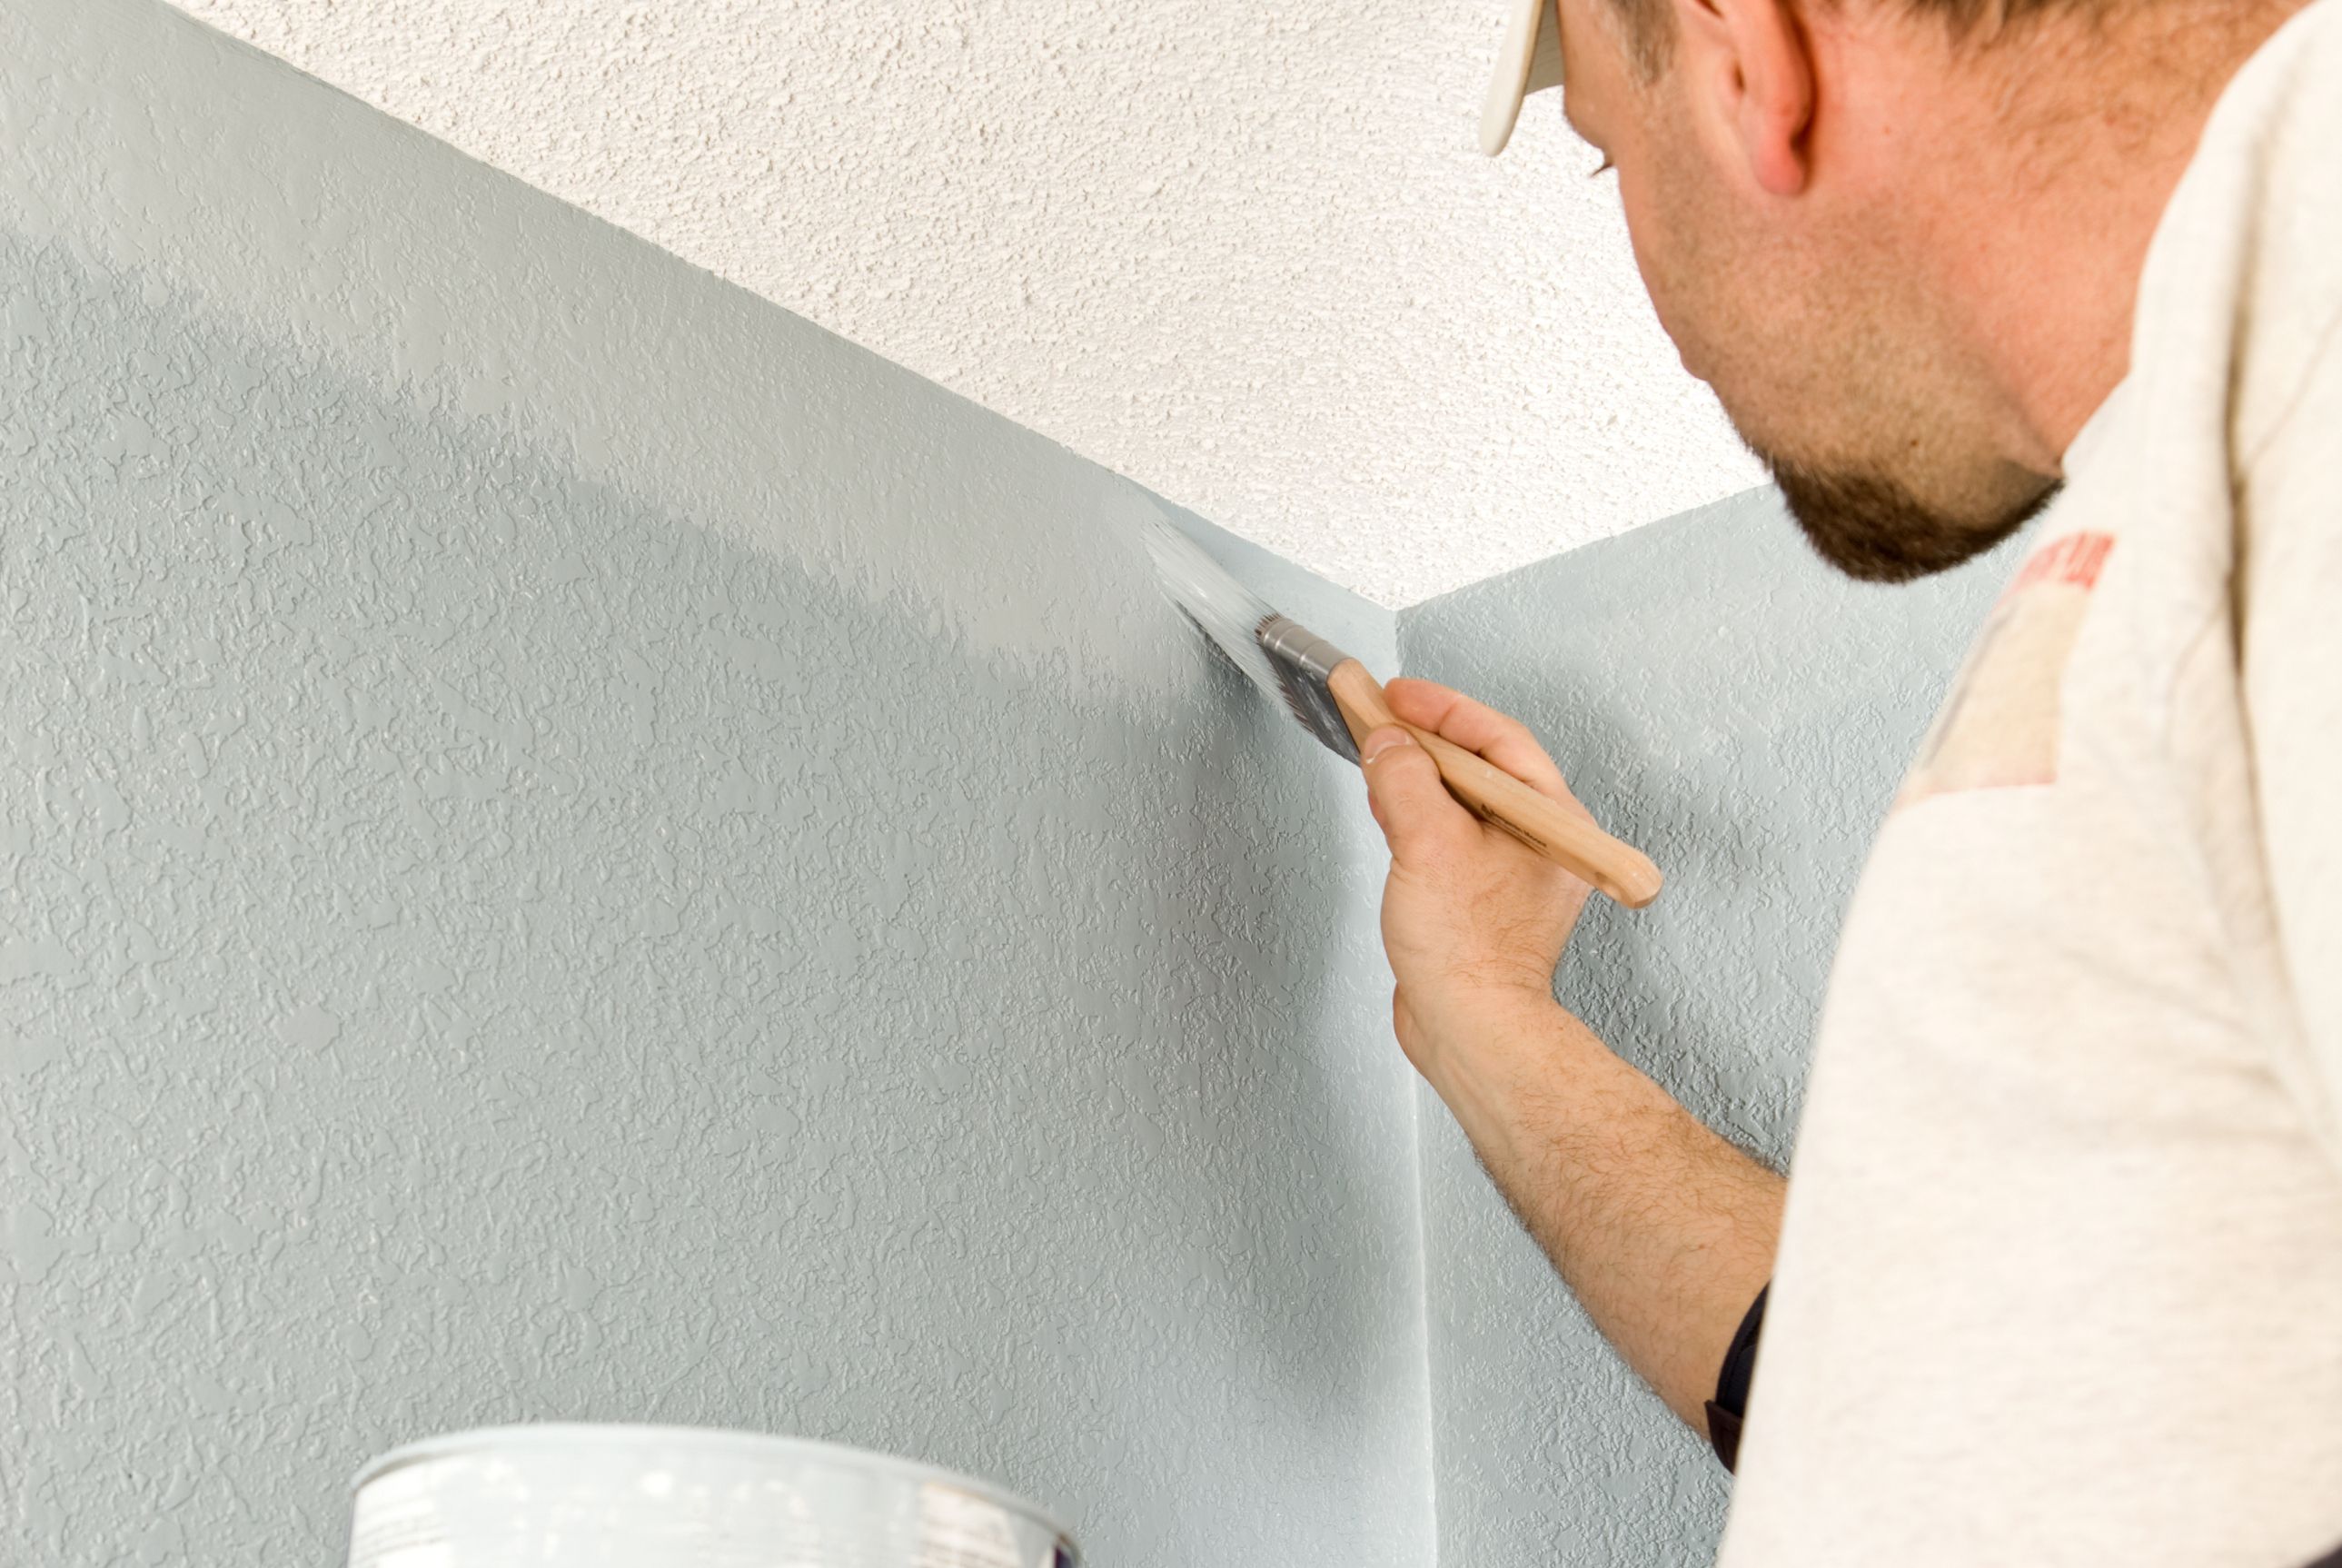 Paint Taping vs. Cutting In - Which One Is Best?